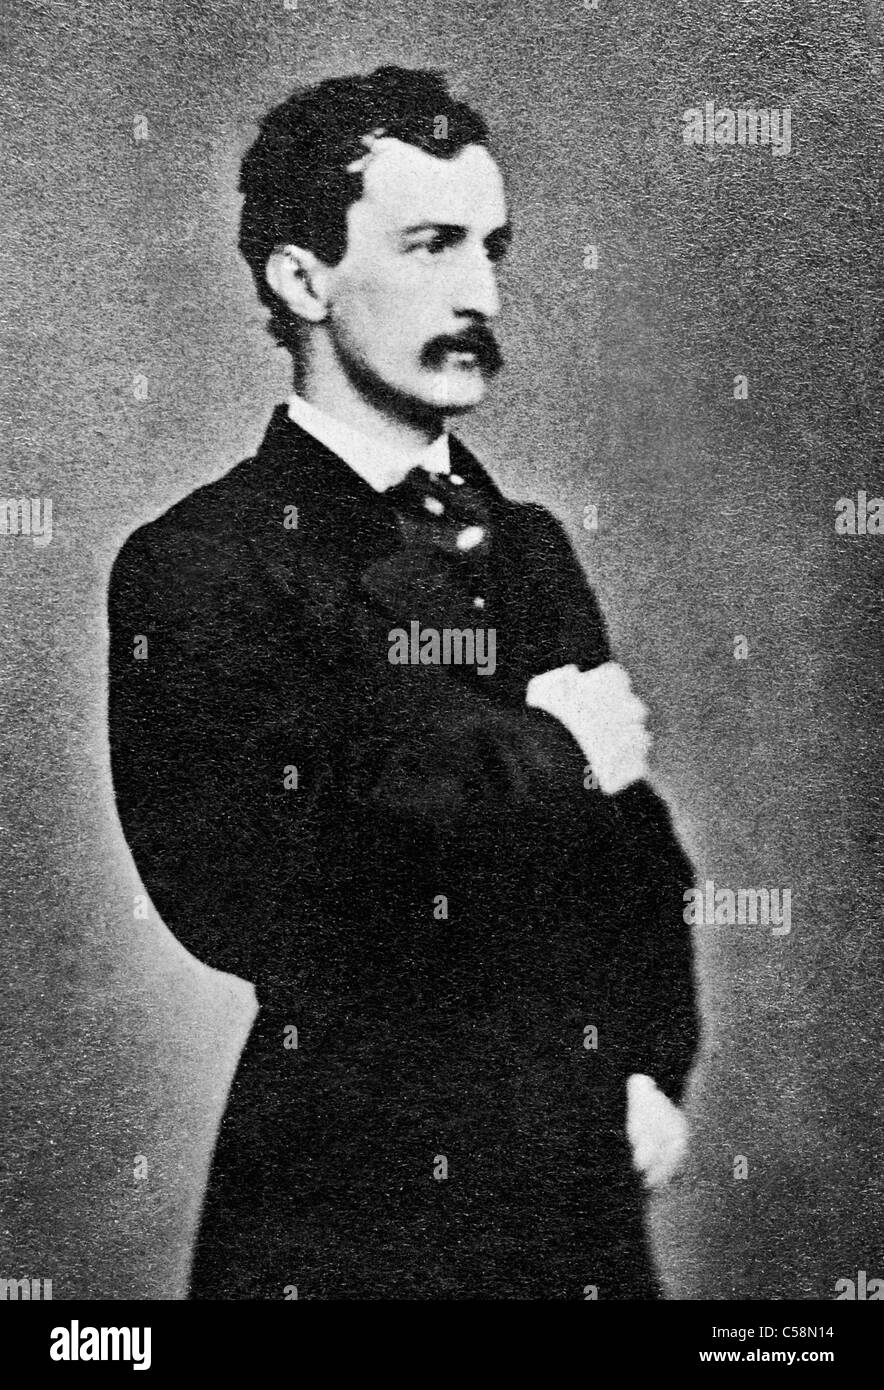 Portrait photo of actor John Wilkes Booth (1838 - 1865) - the man who assassinated US President Abraham Lincoln in April 1865. Stock Photo